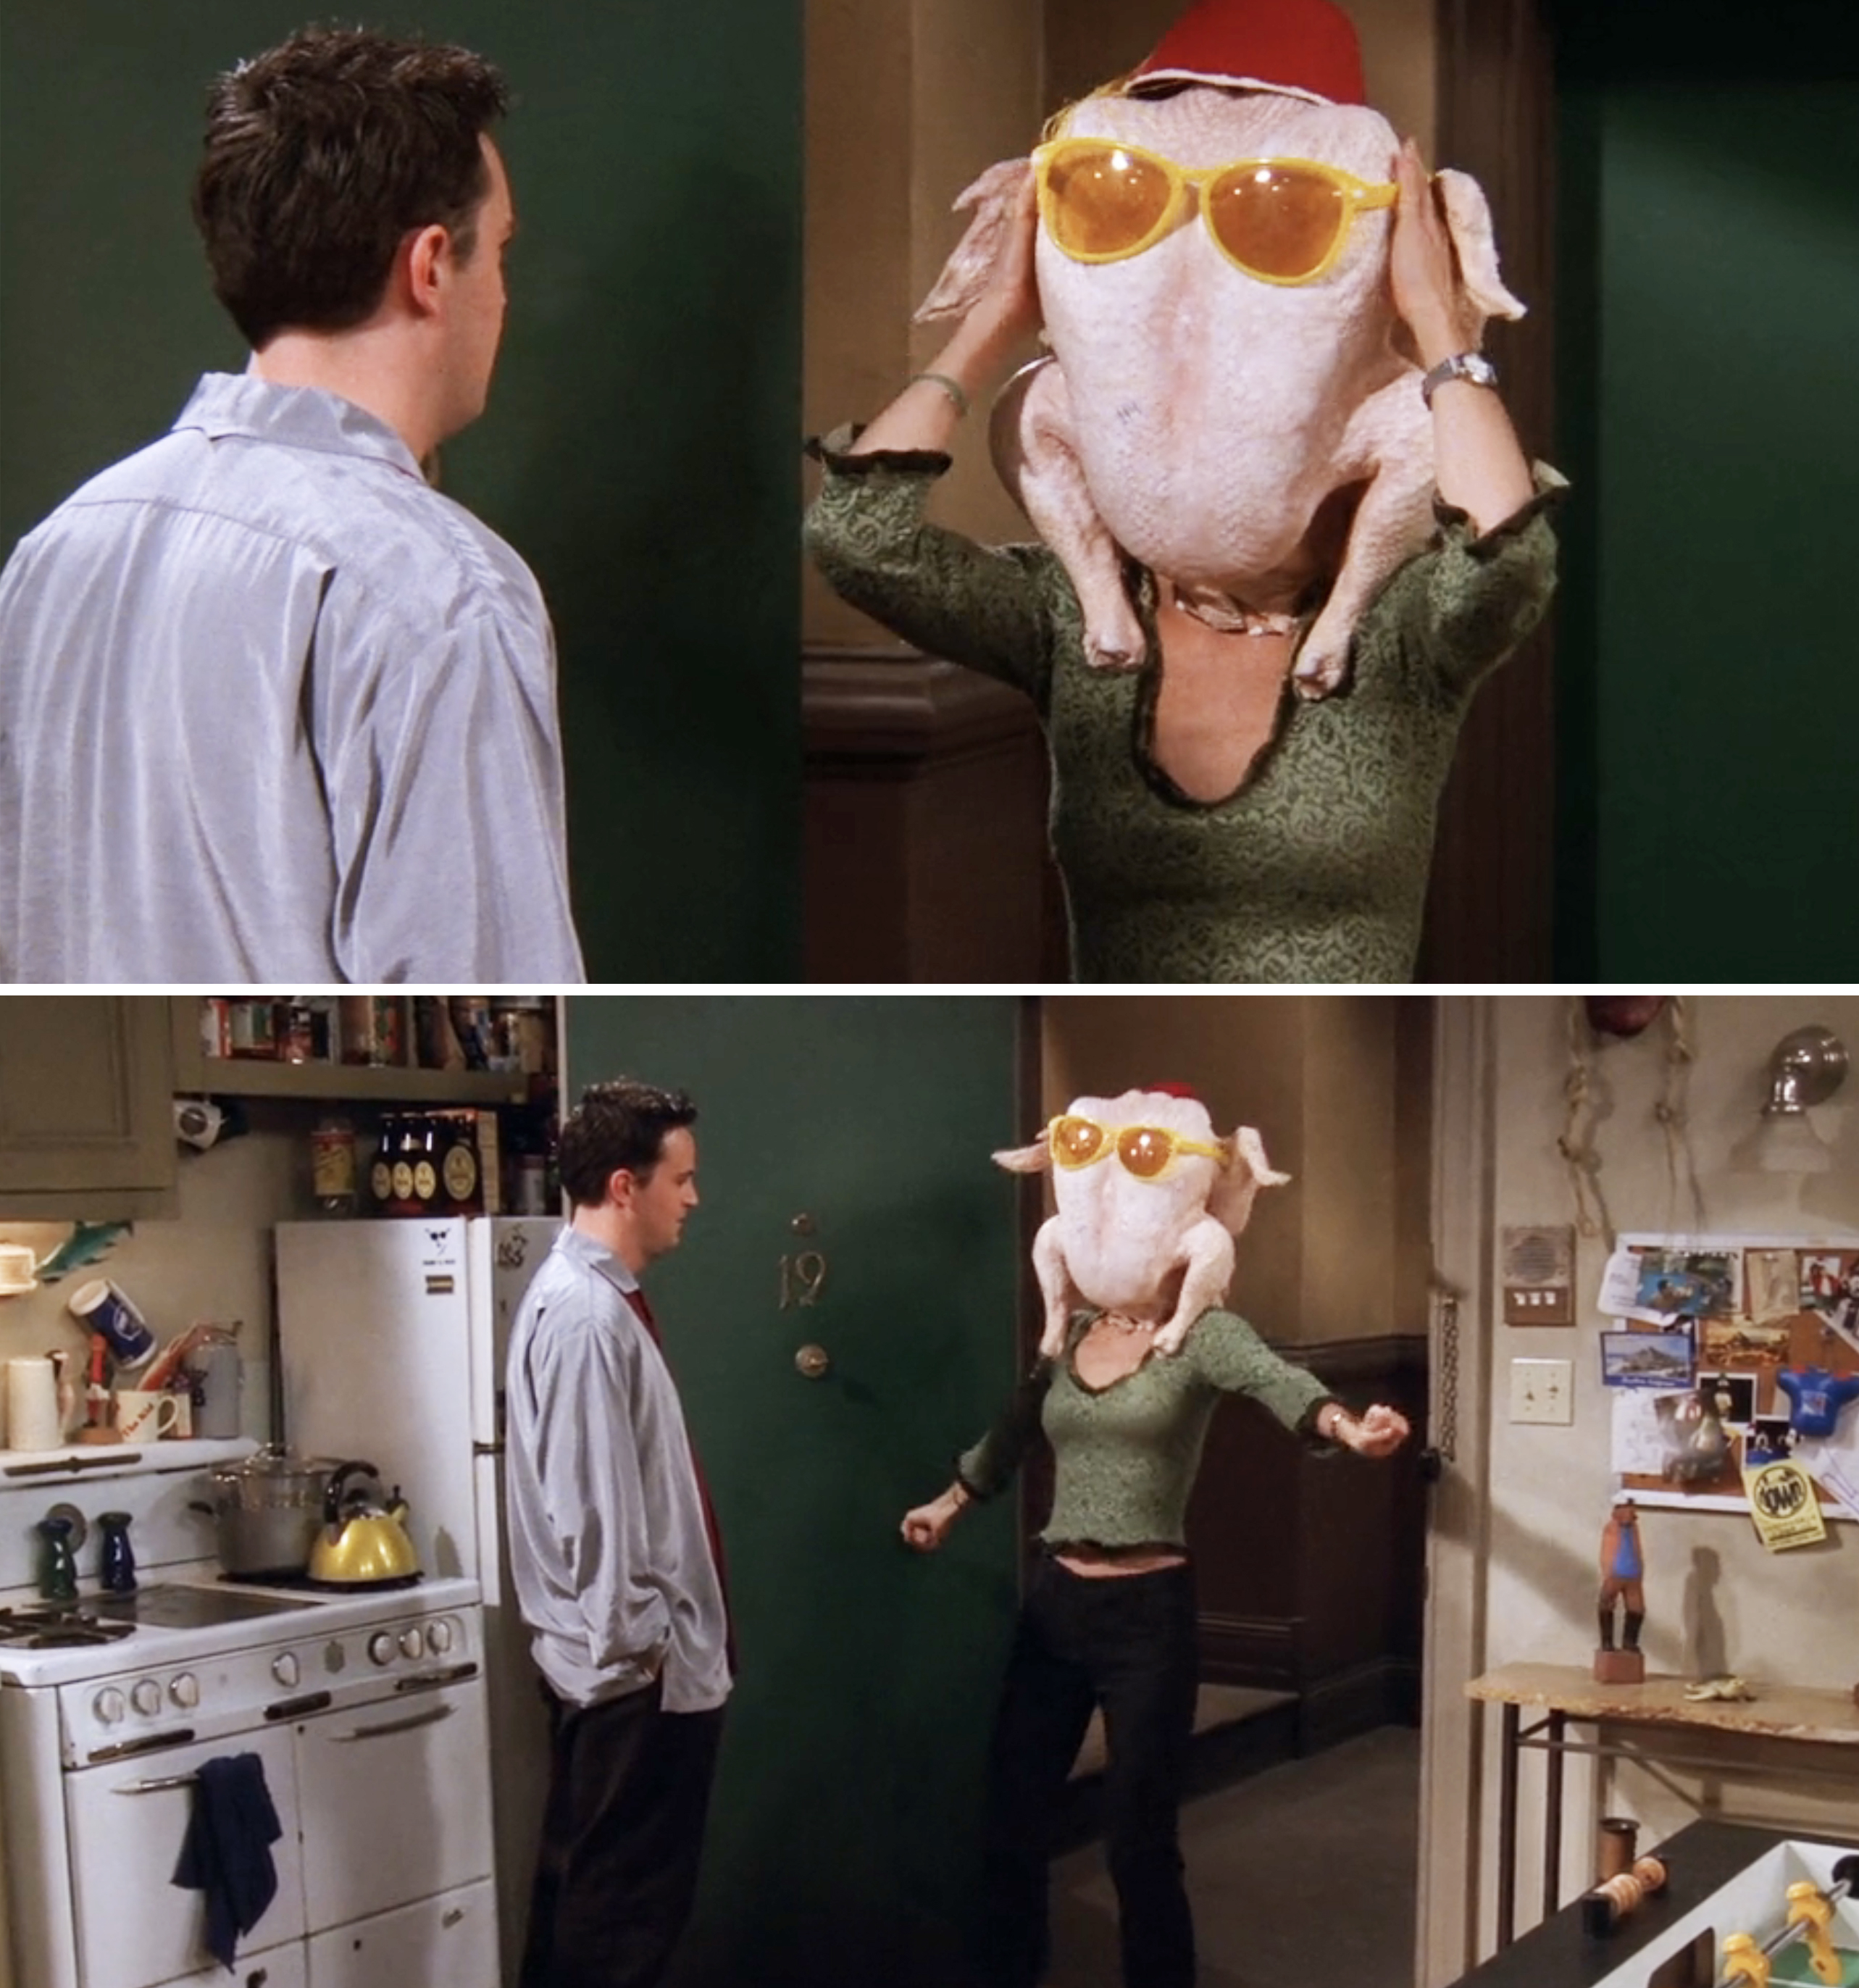 monica dancing with a turkey on her head